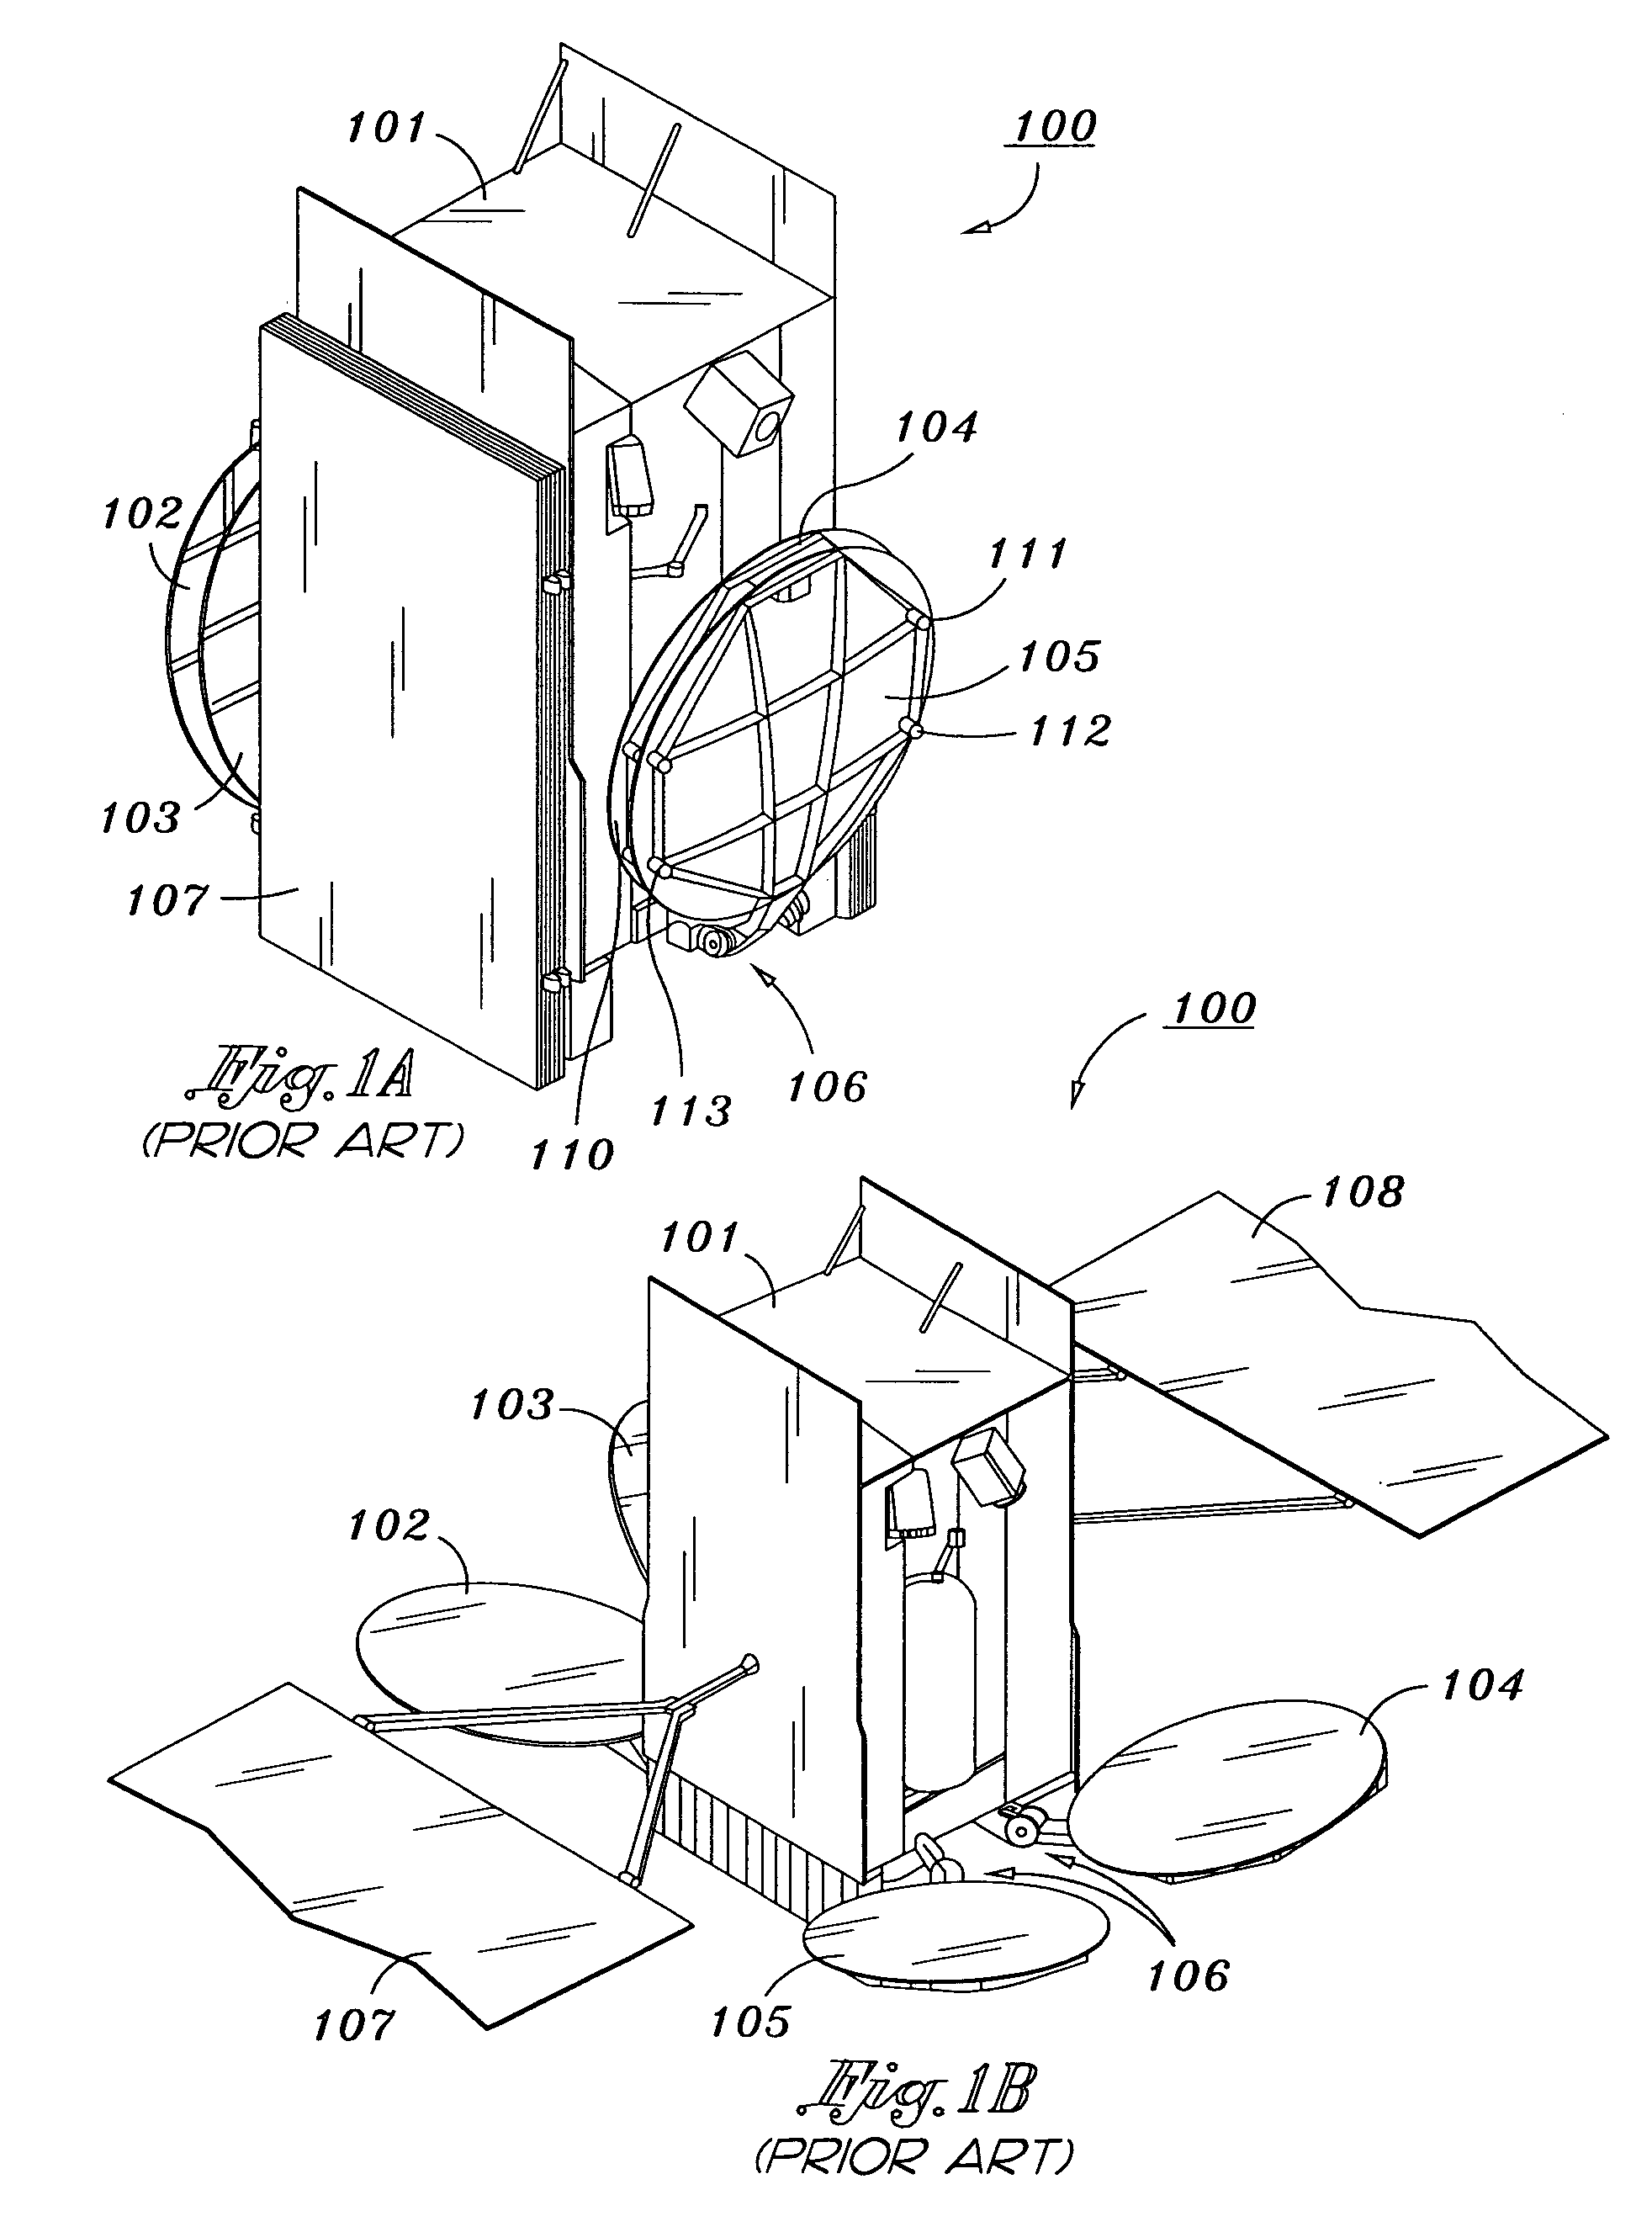 Enhanced antenna stowage and deployment system